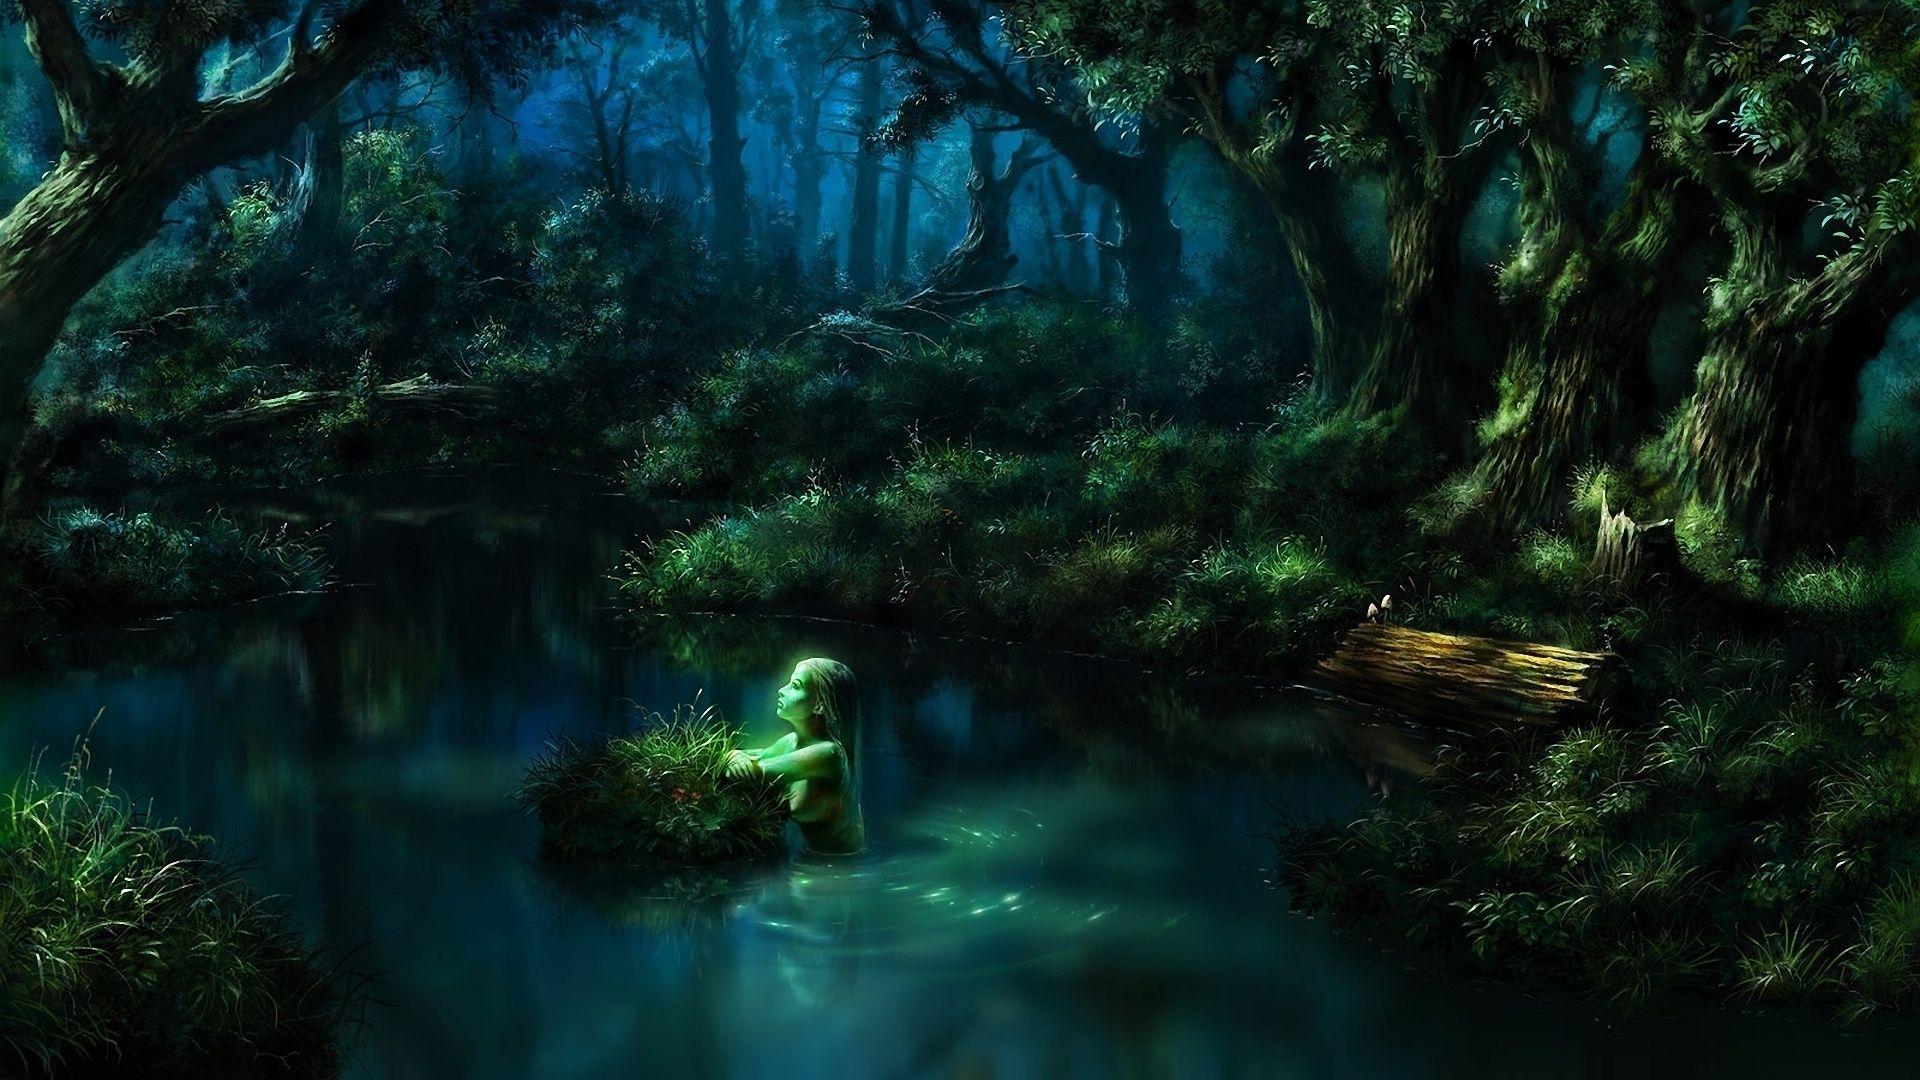 Water, Art, Girl, Lake, Nymph, Bump, Pond, Forest